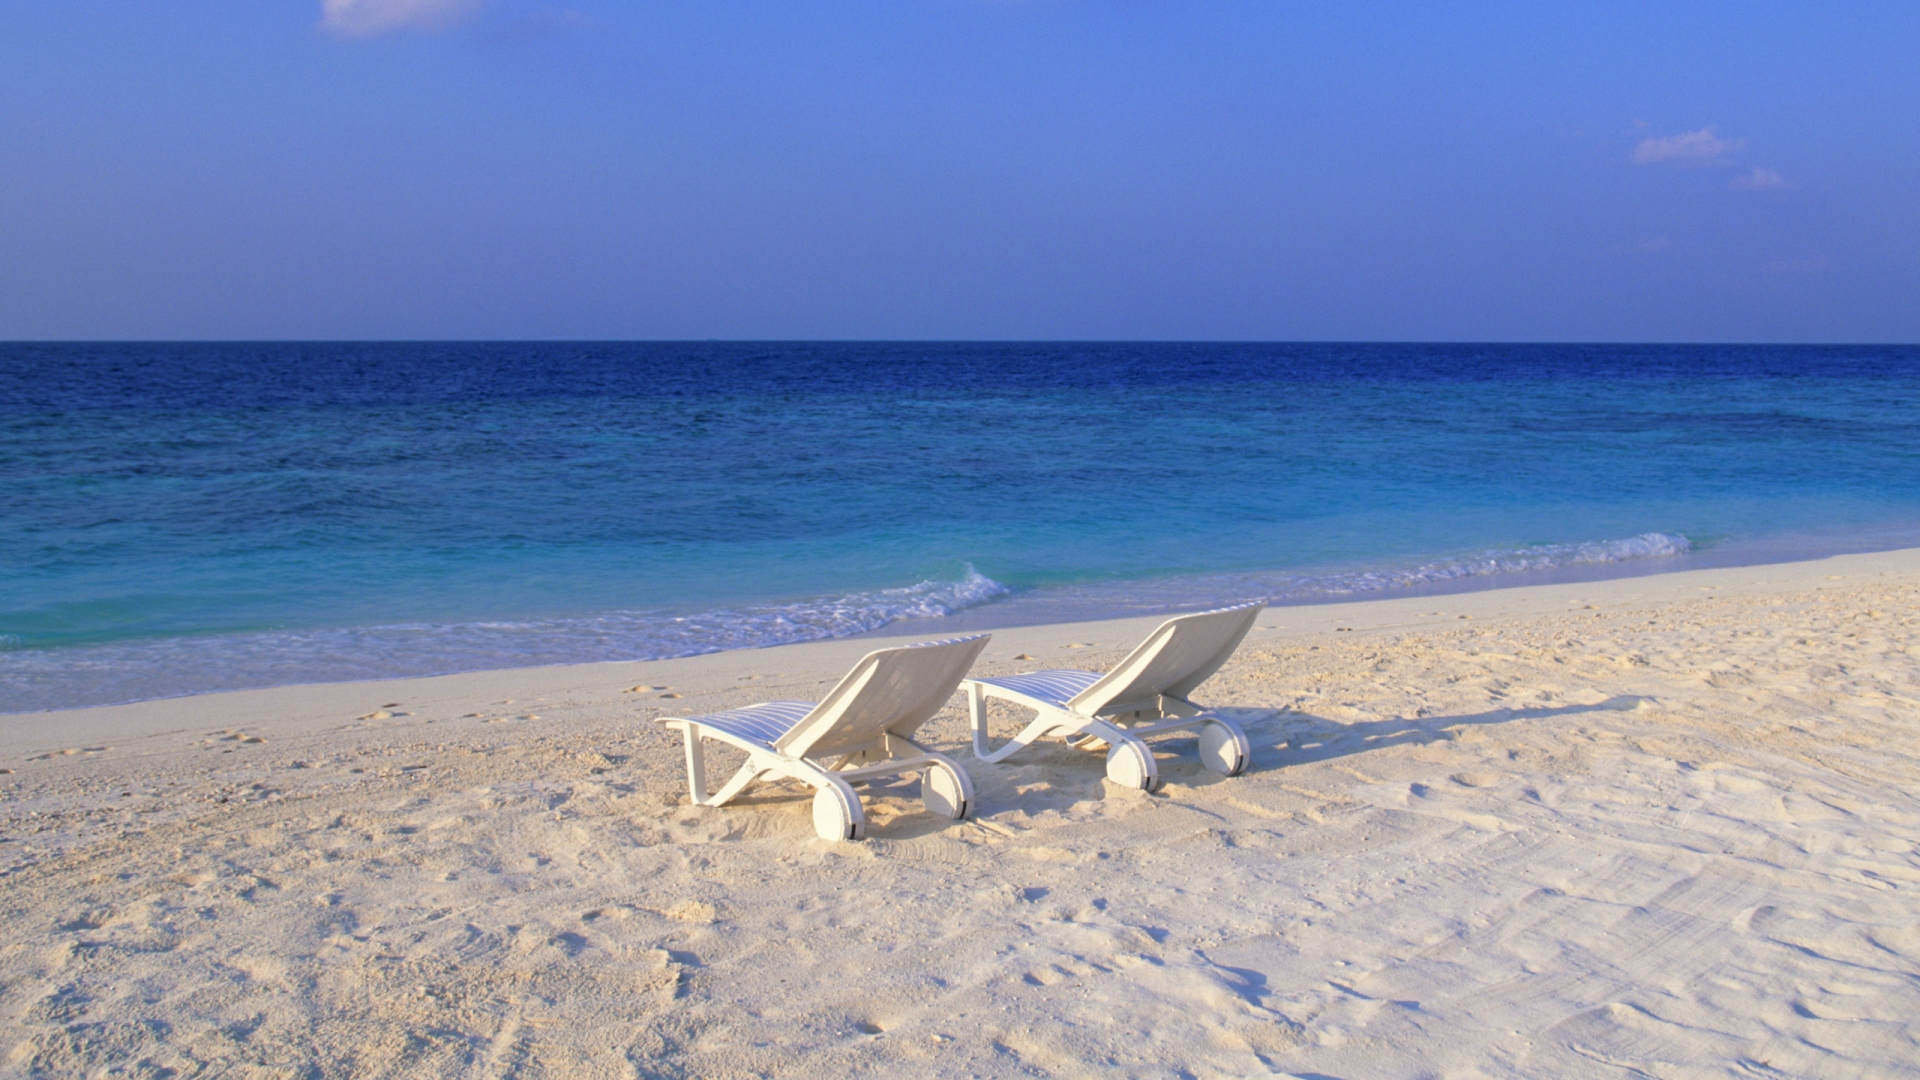 Deck Chairs on the Beach at Maldives